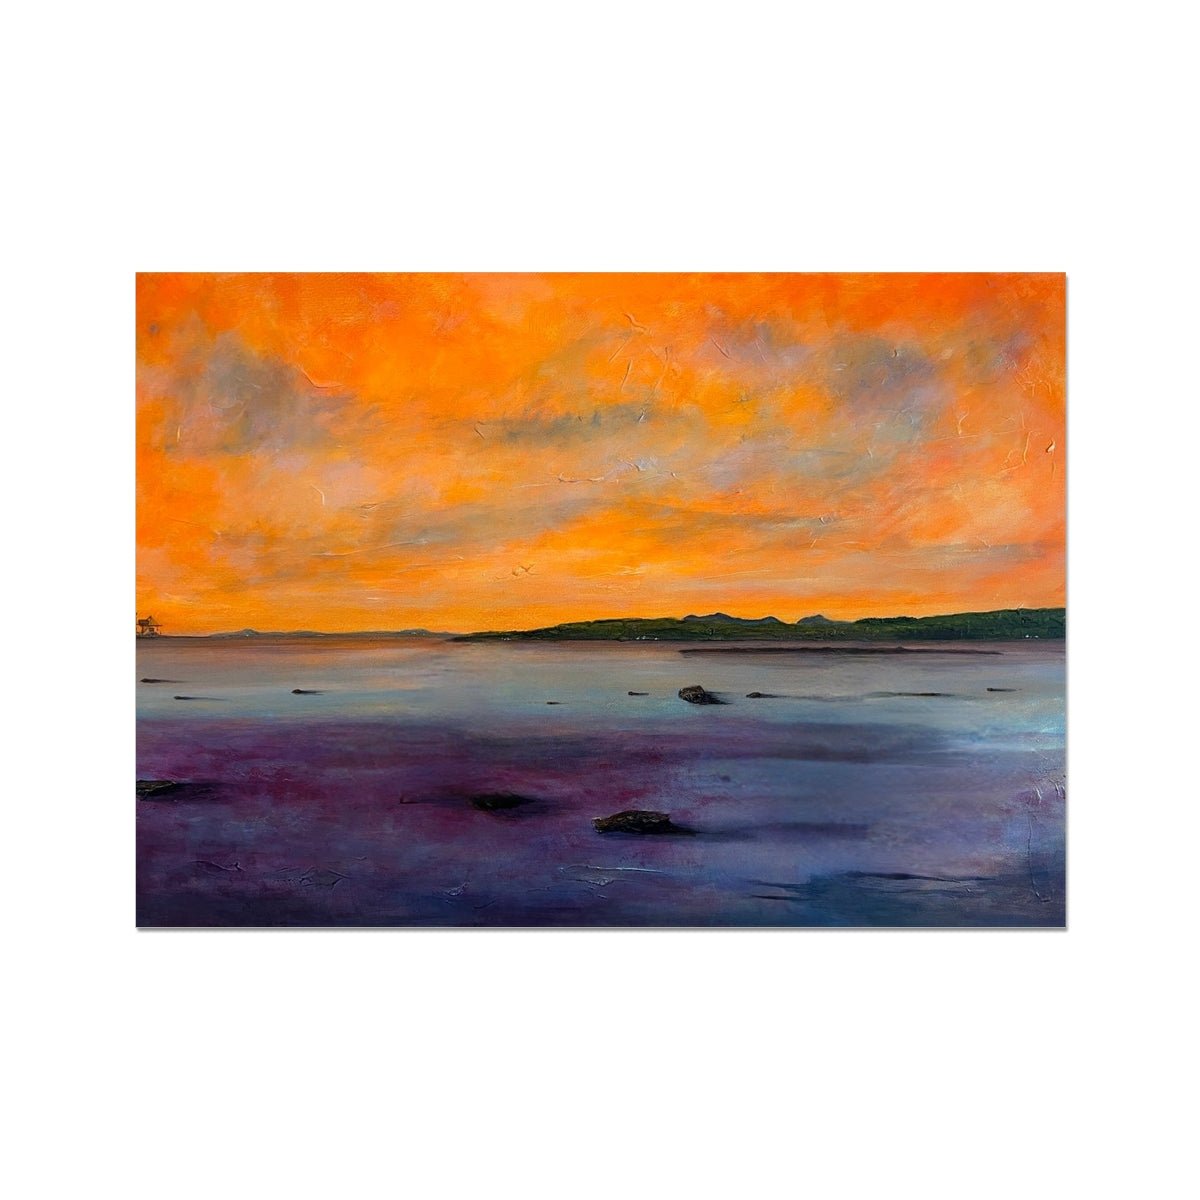 Looking From Largs Painting | Fine Art Prints From Scotland-Unframed Prints-River Clyde Art Gallery-A2 Landscape-Paintings, Prints, Homeware, Art Gifts From Scotland By Scottish Artist Kevin Hunter